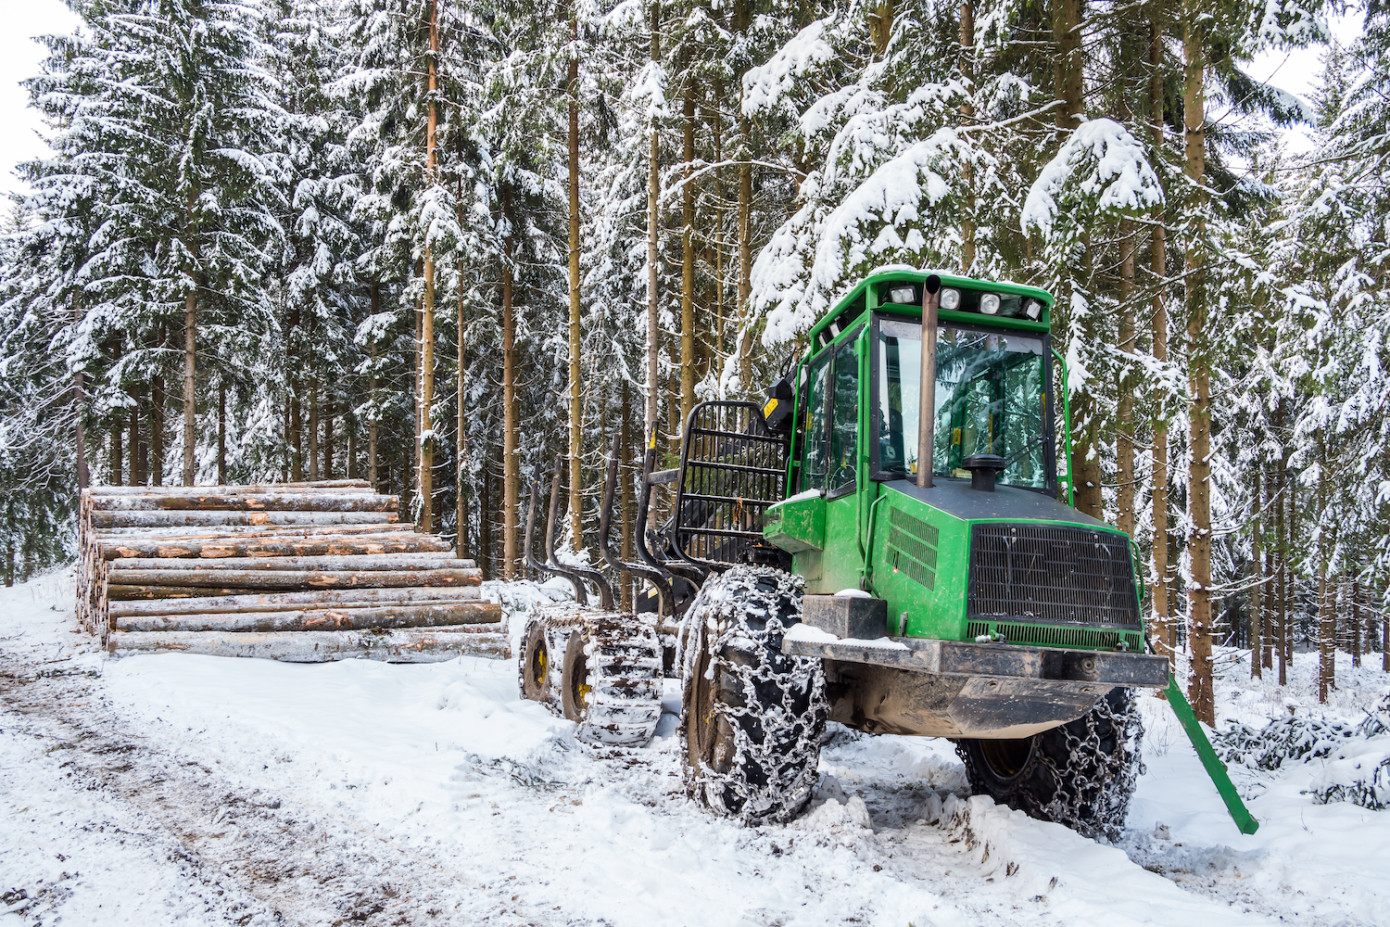 Roundwood harvesting in Finland sees uptick in February